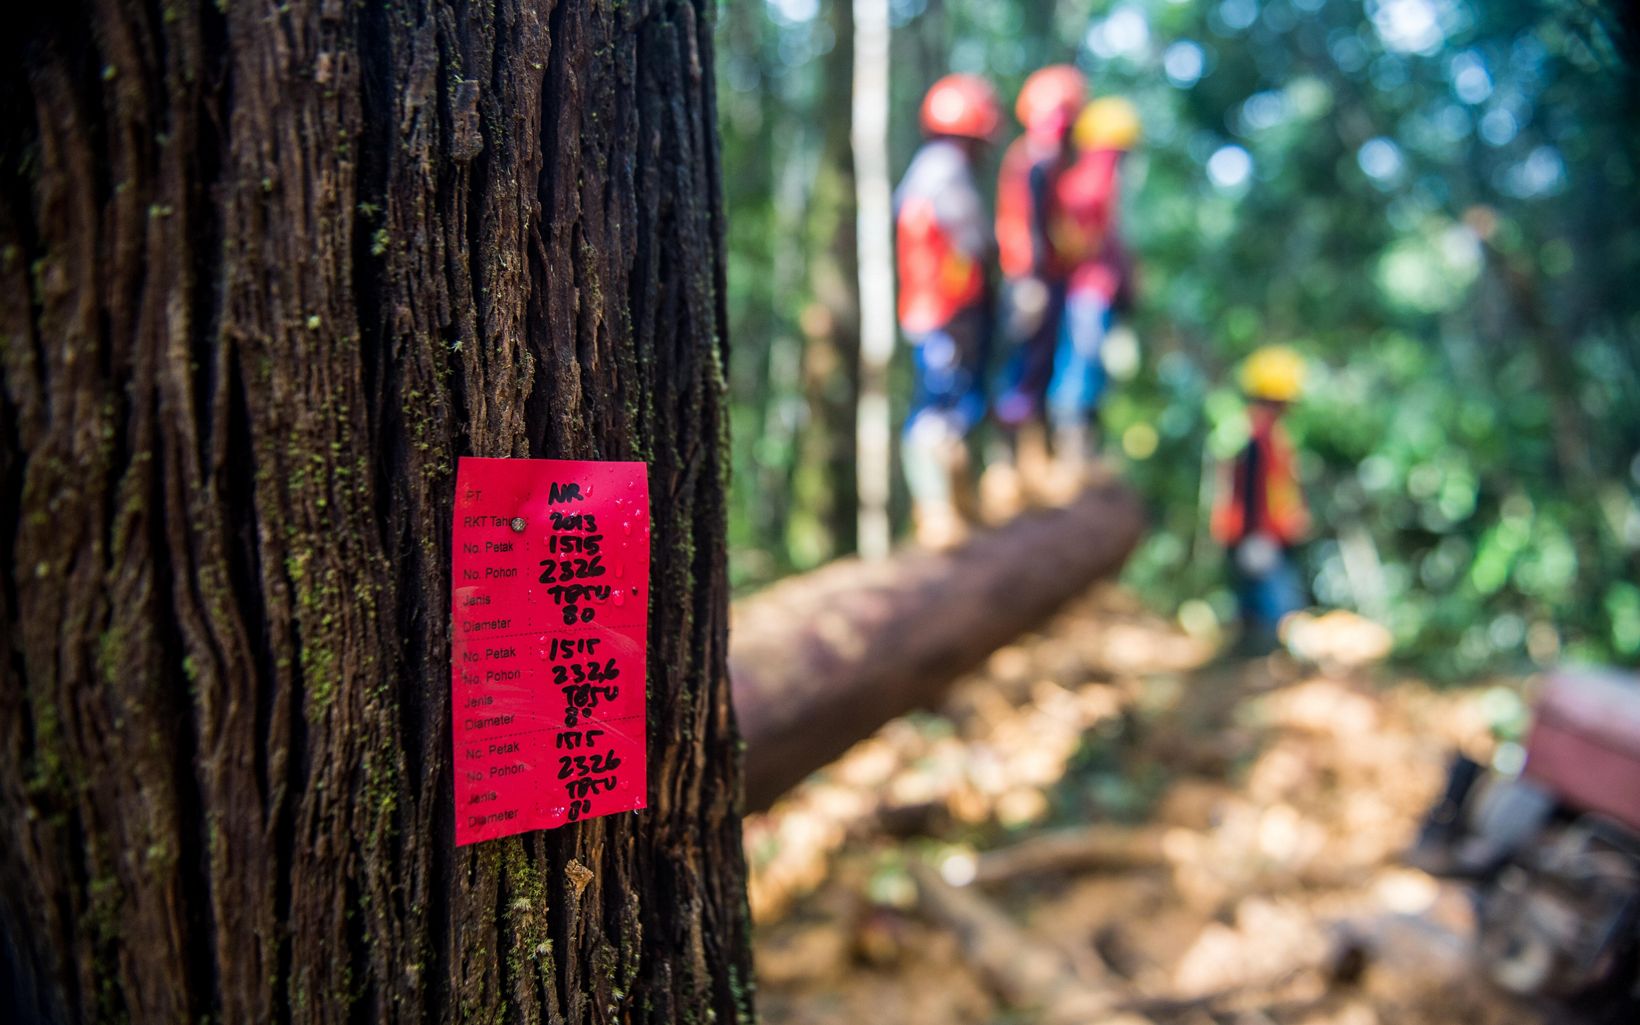 Areal HPH Tagged tree at the number four concession logging area in the Kalimantan region of Borneo, Indonesia where a logging company has been given permit to proceed with RIL-C. © Nick Hall